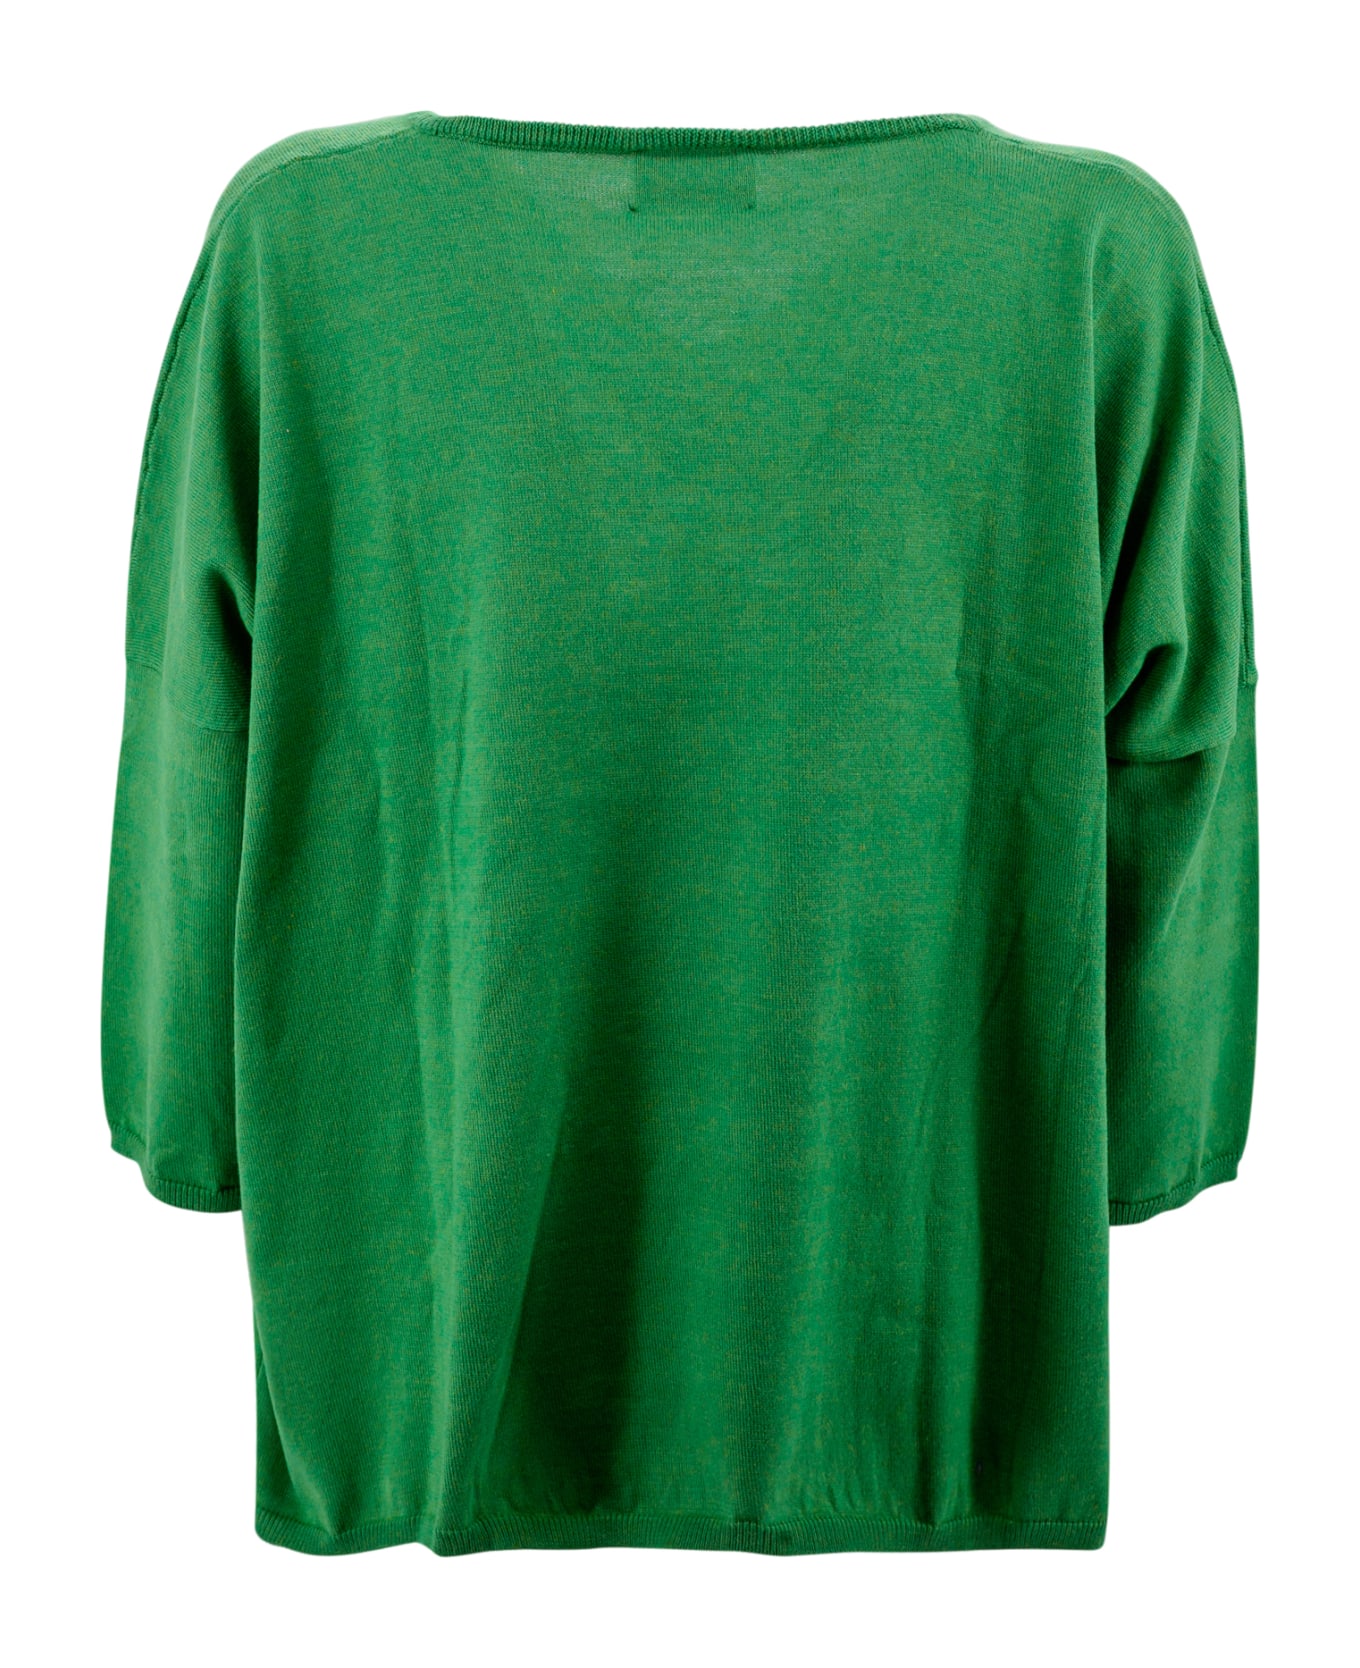 Be You V-neck Sweater - Green